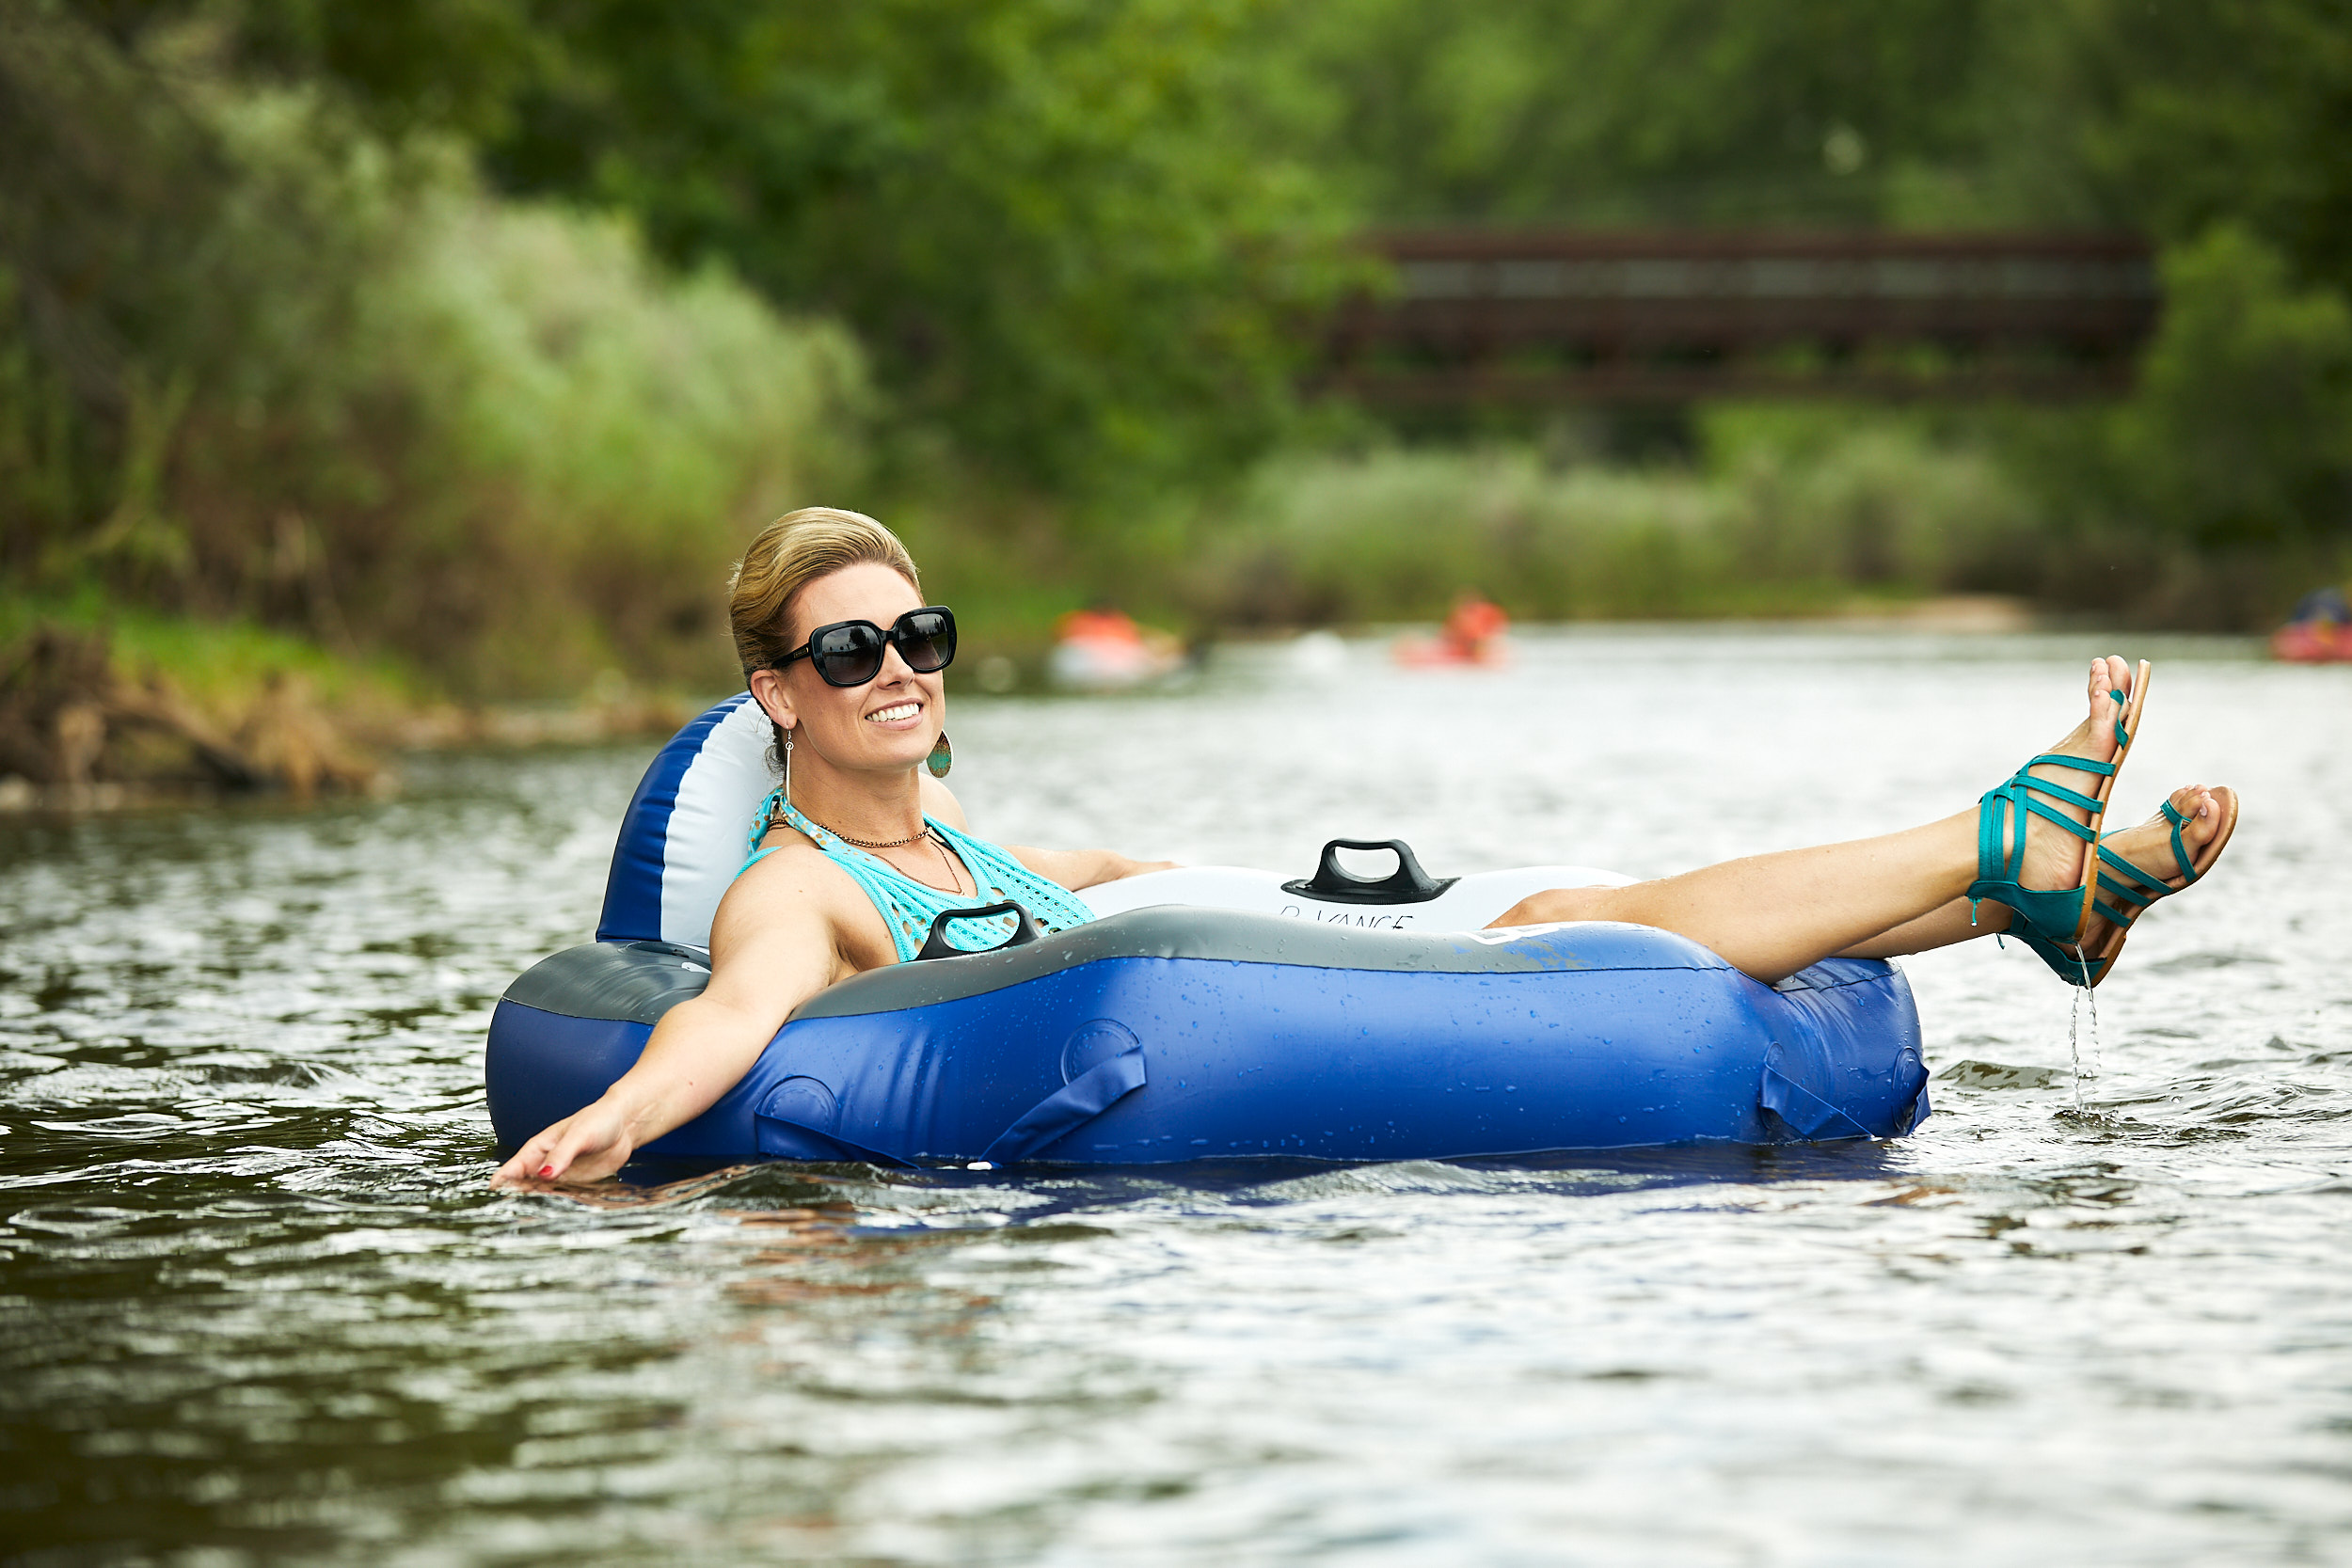 Elegant woman tubing the Poudre River in Windsor, Colorado - John Robson Photography